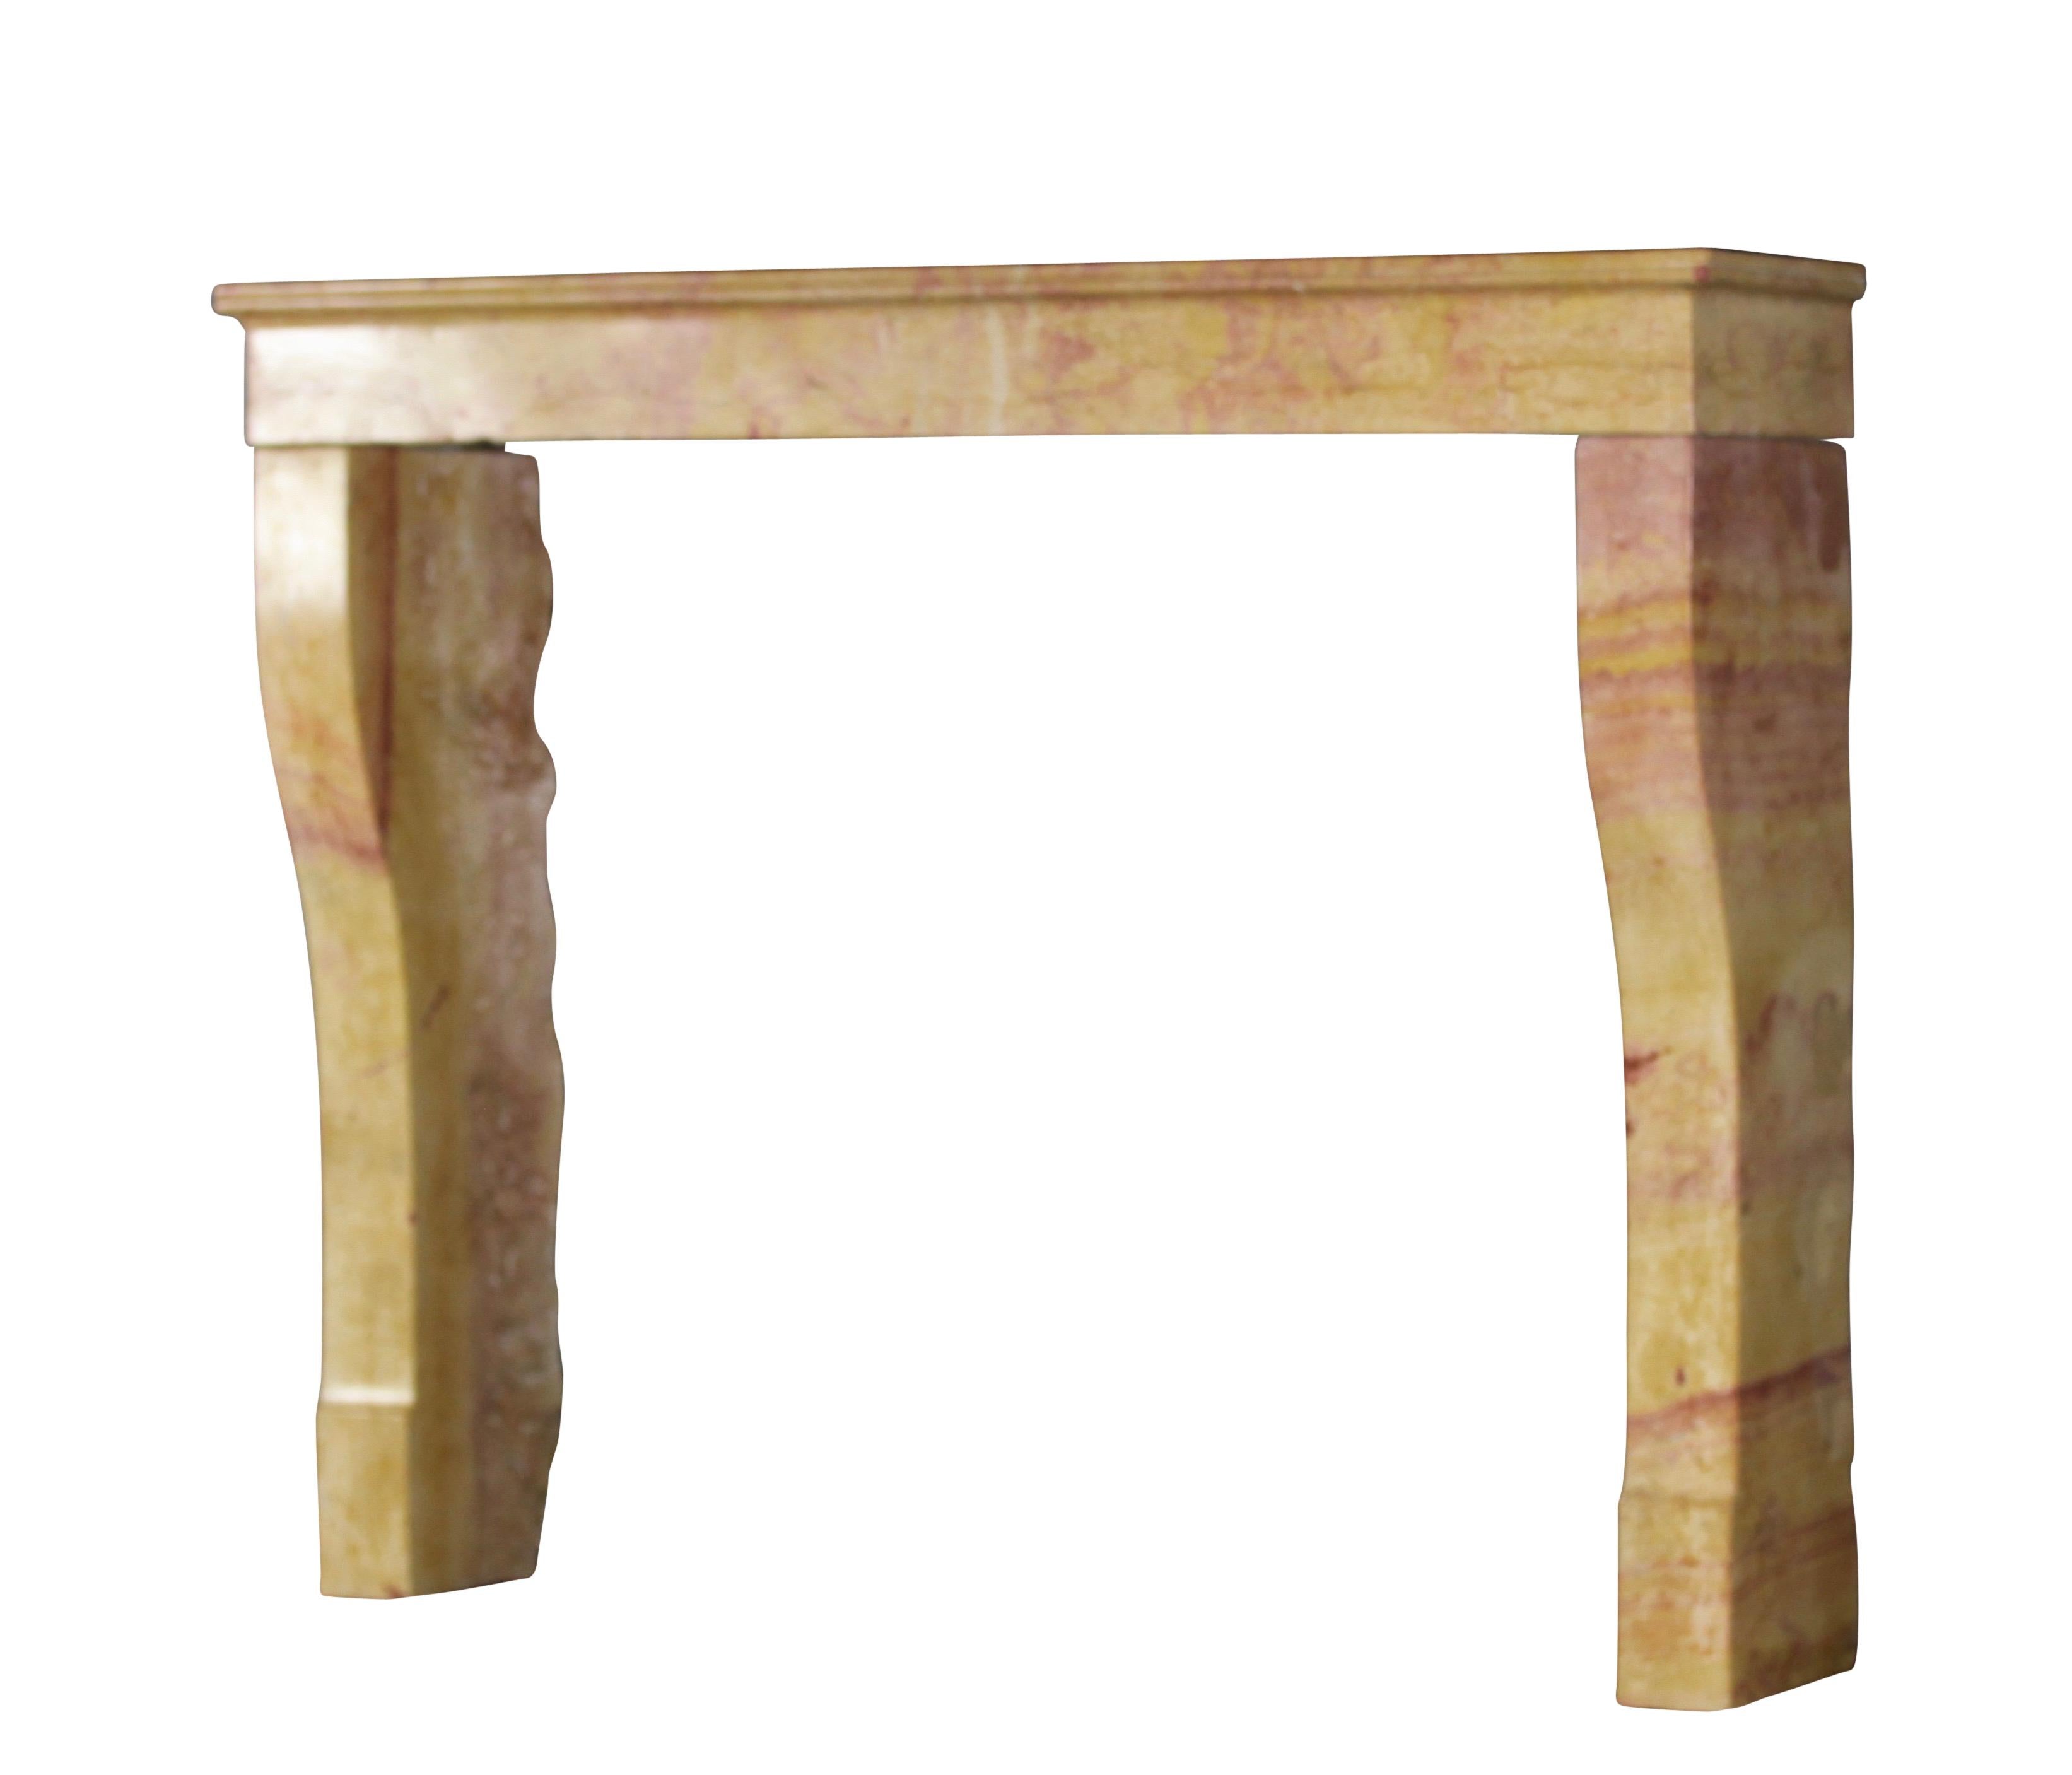 A 19th century small, Petite Bourguignon antique fireplace surround made out of the bicolor Corton hard stone/marble. Corton is a small village in the middle of the vineyards between Dijon and Beaune.
Measures:
127 cm exterior width 50 inch
105